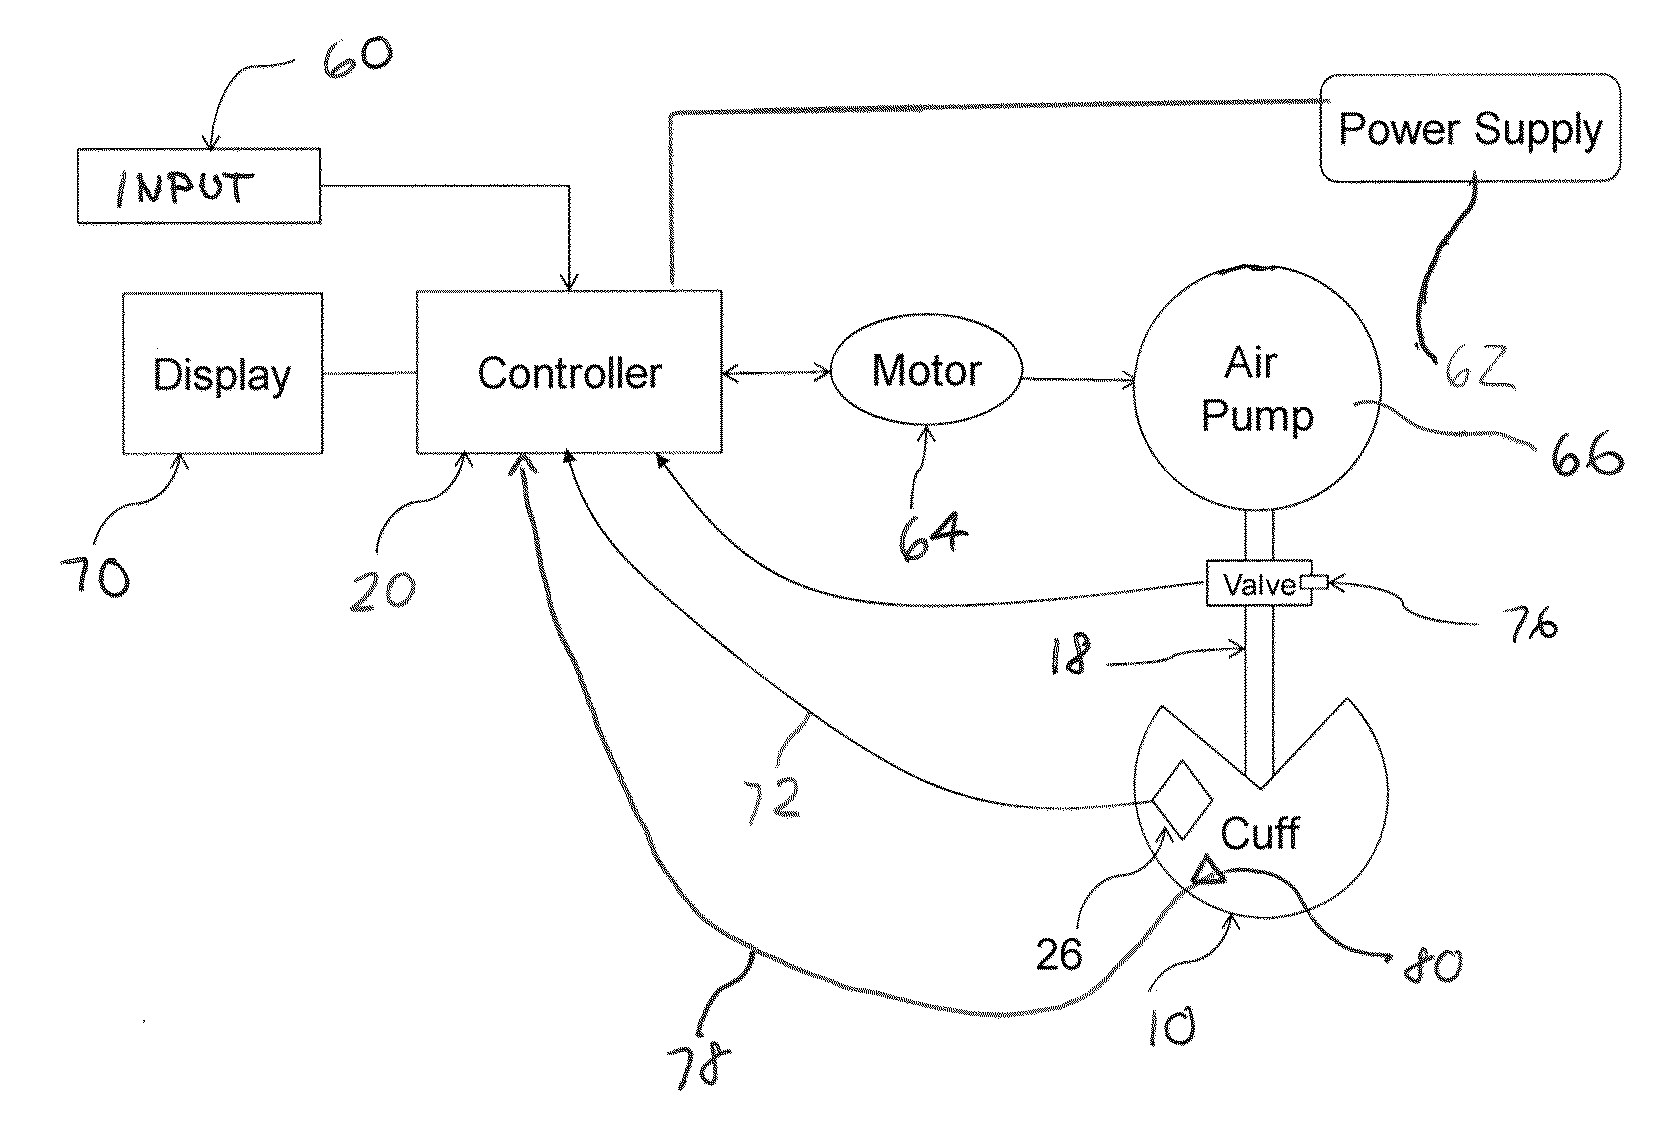 Apparatus and method for real-time measurement of changes in volume of breast and other organs